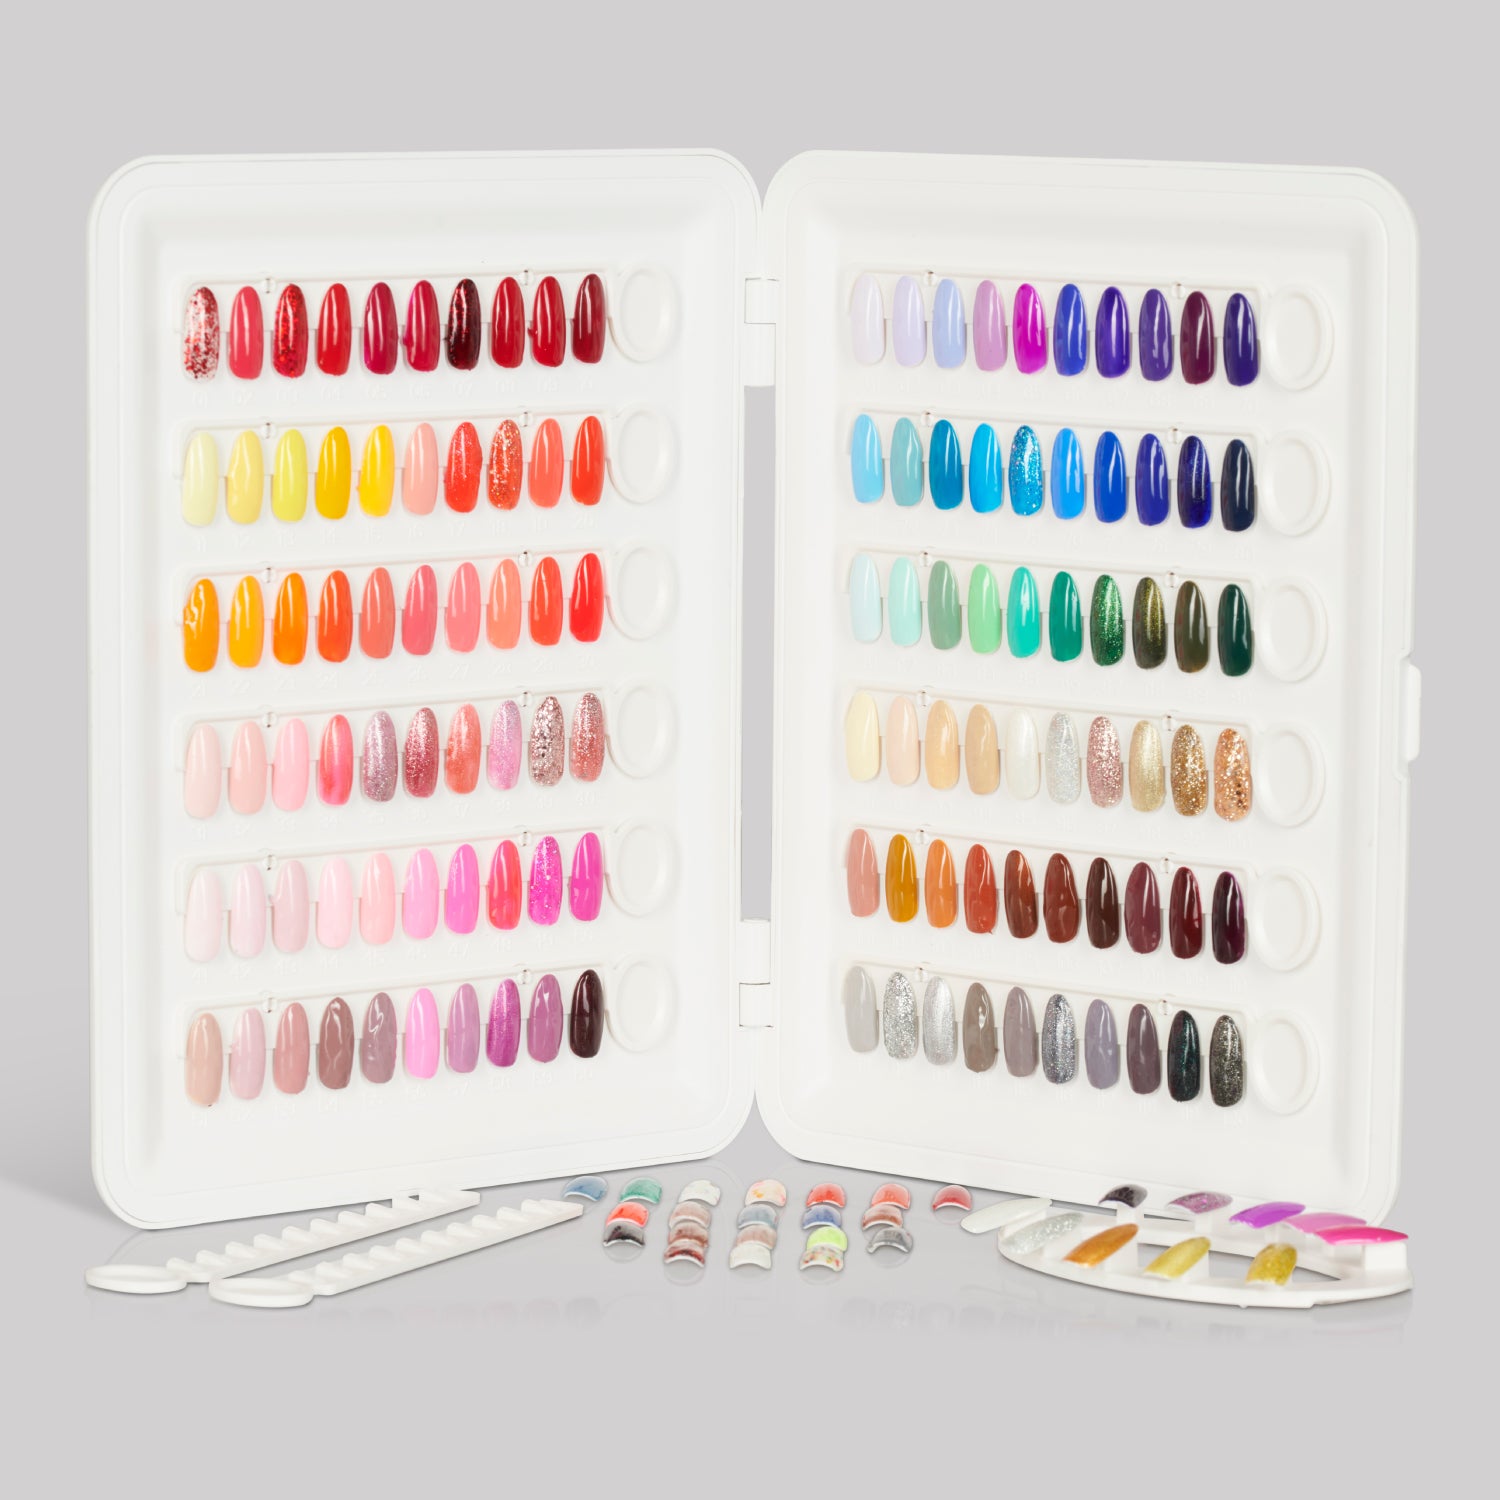 Gelish color swatches - Gel Manicure- Must wear UV protective Glove | Gel  manicure, Gelish nail colours, Gelish colours